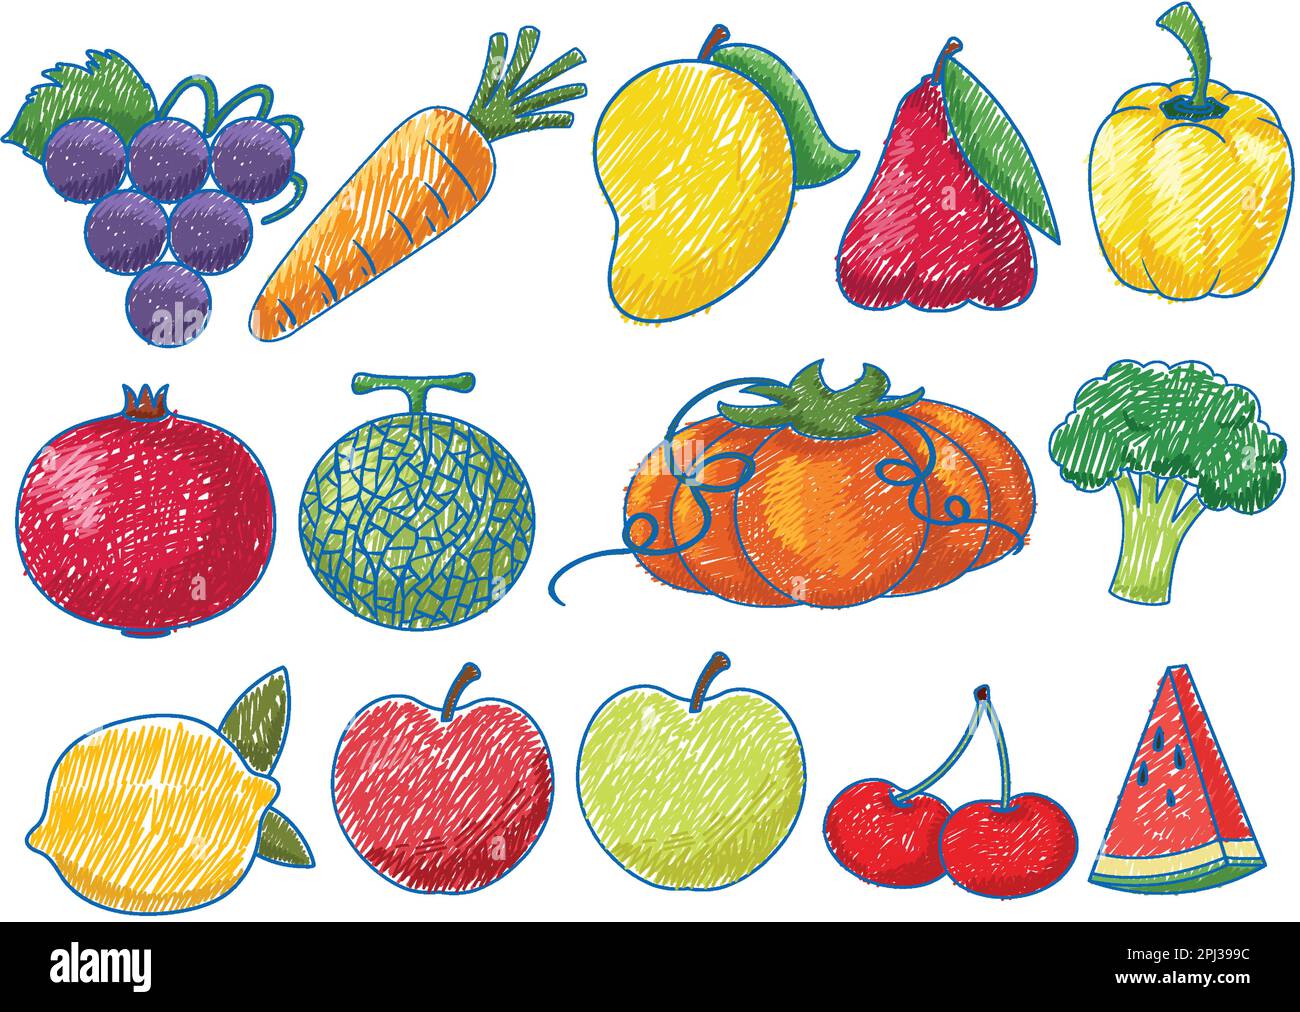 SUPER EASY DRAWING, How to Draw Fruits and Vegetables Easy for Beginners,  Ks Art - YouTube